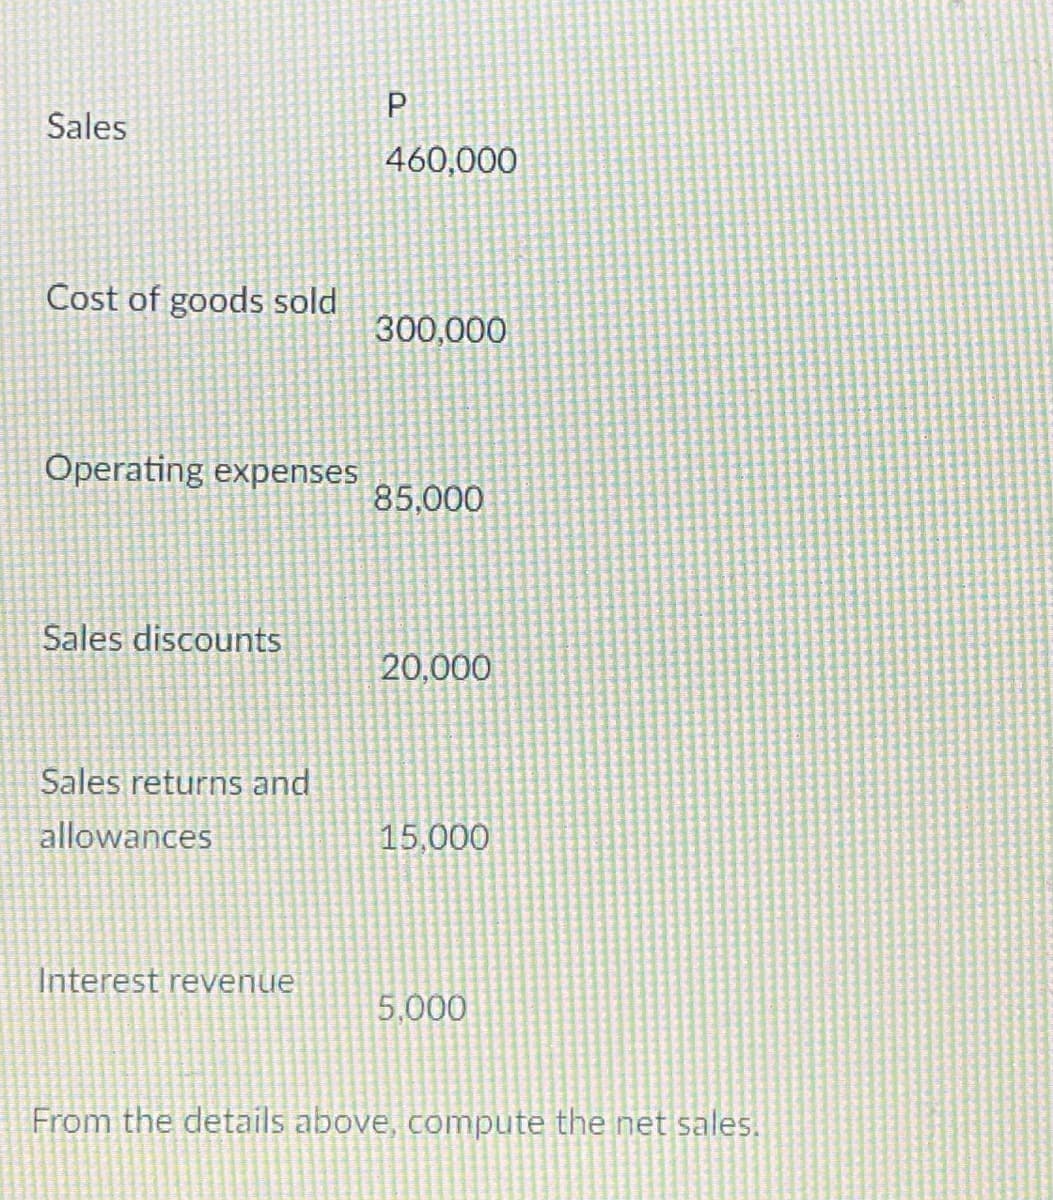 Sales
Cost of goods sold
Operating expenses
Sales discounts
Sales returns and
allowances
Interest revenue
P
460,000
300,000
85,000
20,000
15,000
5,000
From the details above, compute the net sales.